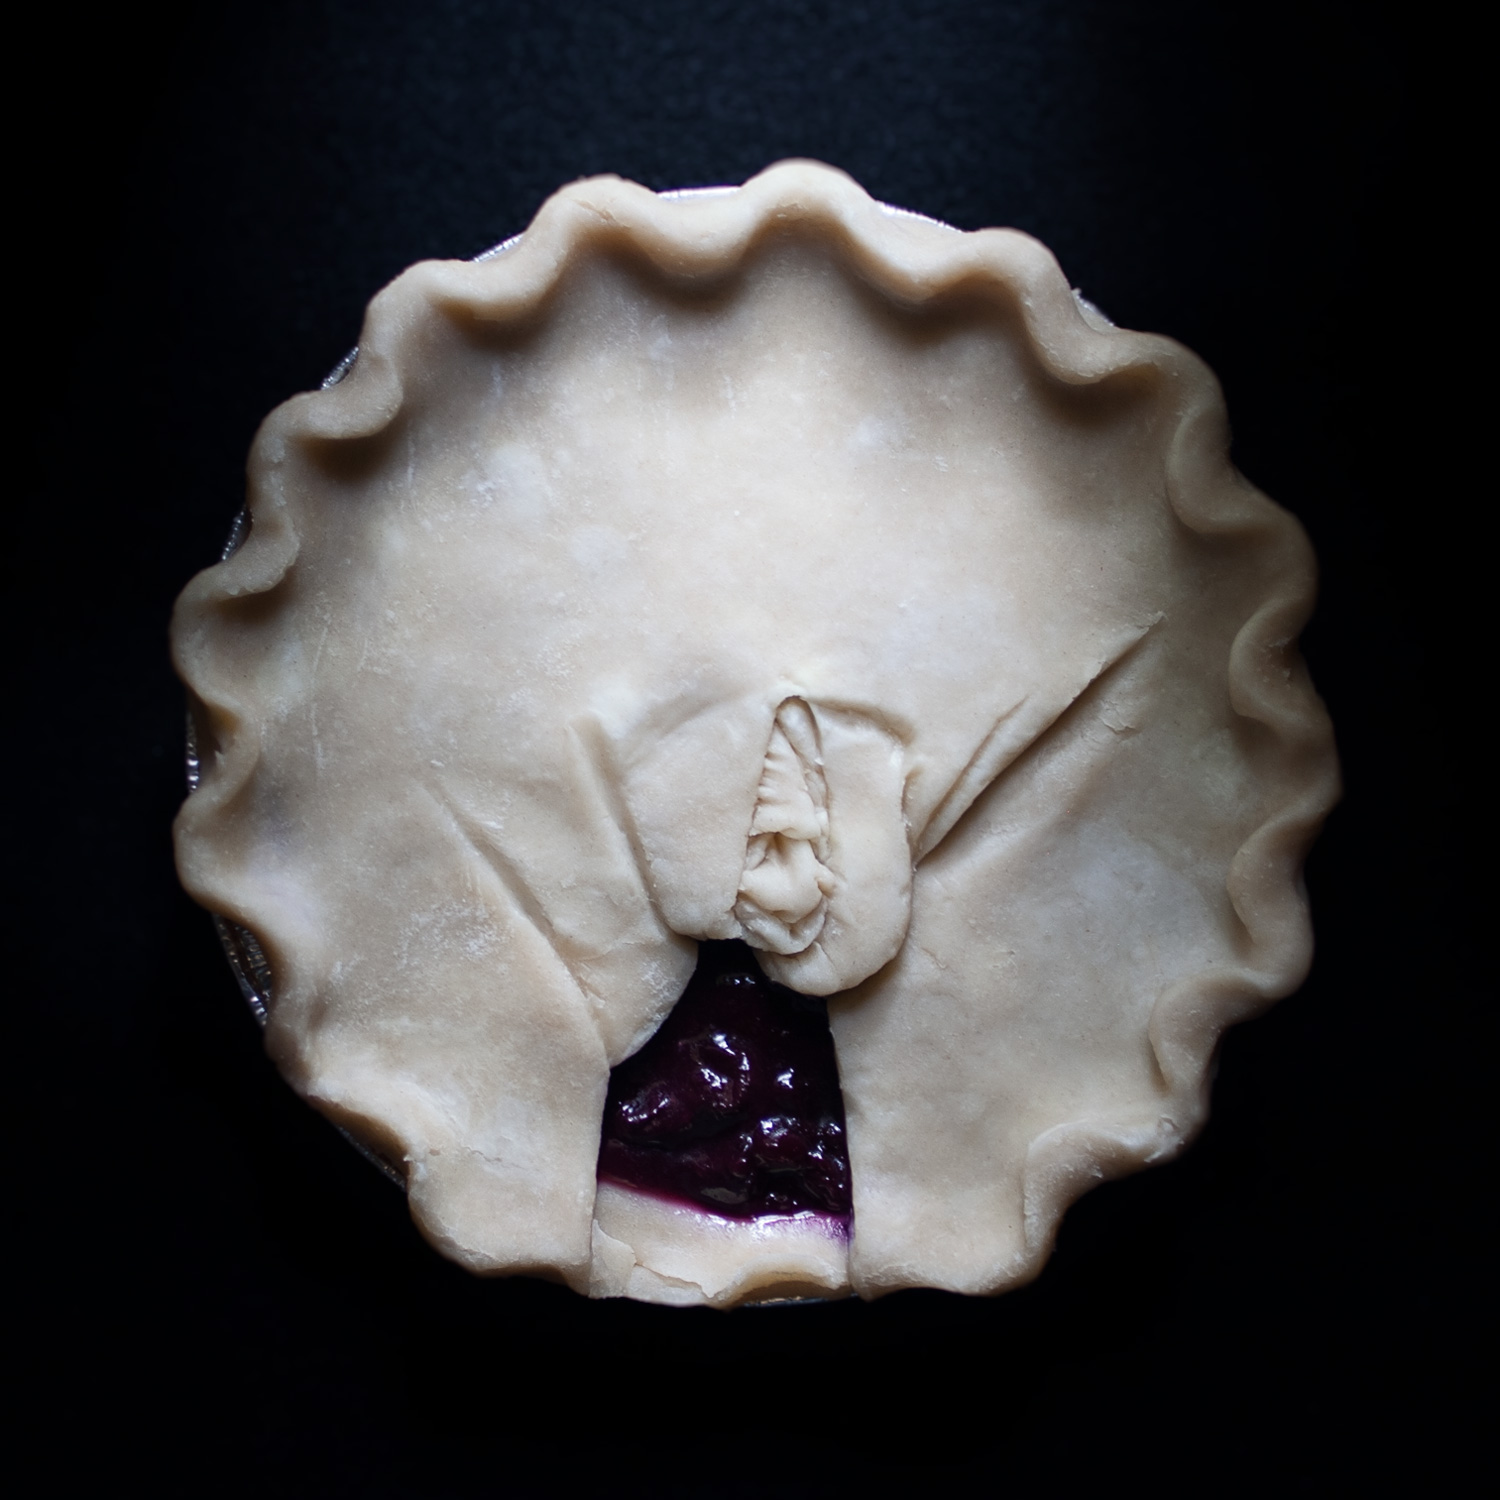 Pie 17, a pie sculpted to appear like a vulva